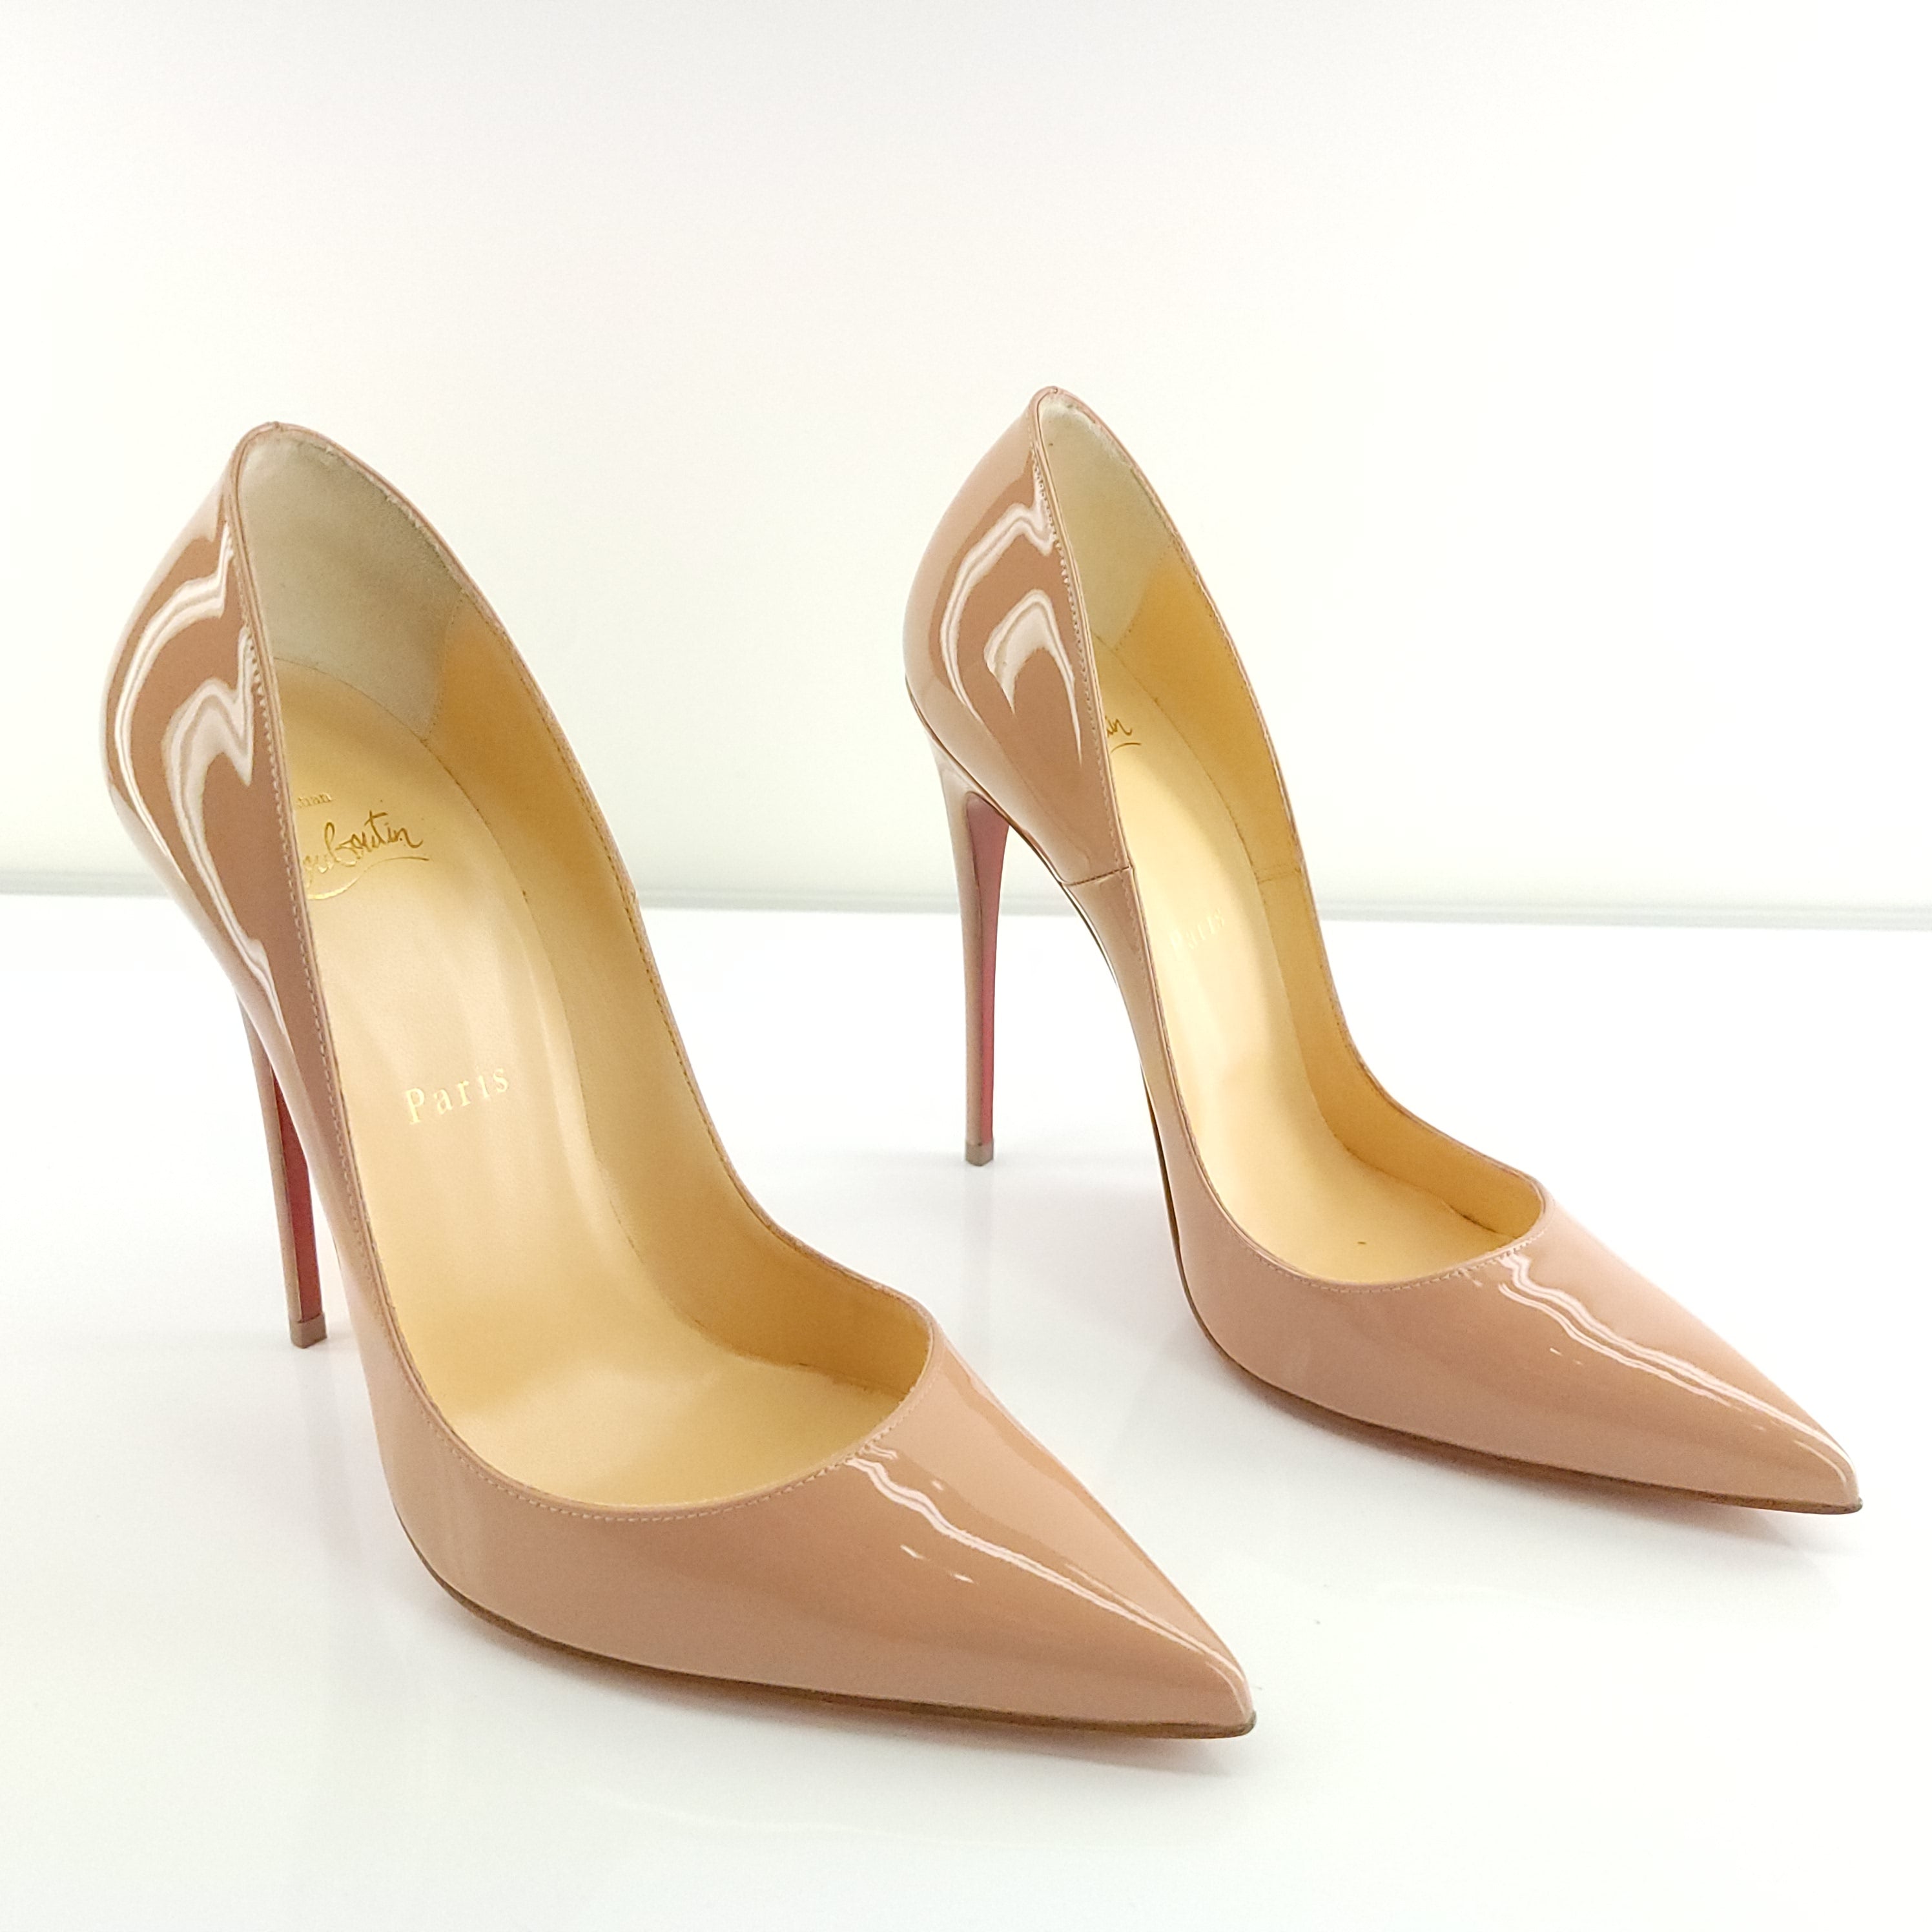 Christian Louboutin So Kate 120 Nude Patent Pumps 37.5 Pigalle Decollete –  St. John's Institute (Hua Ming)